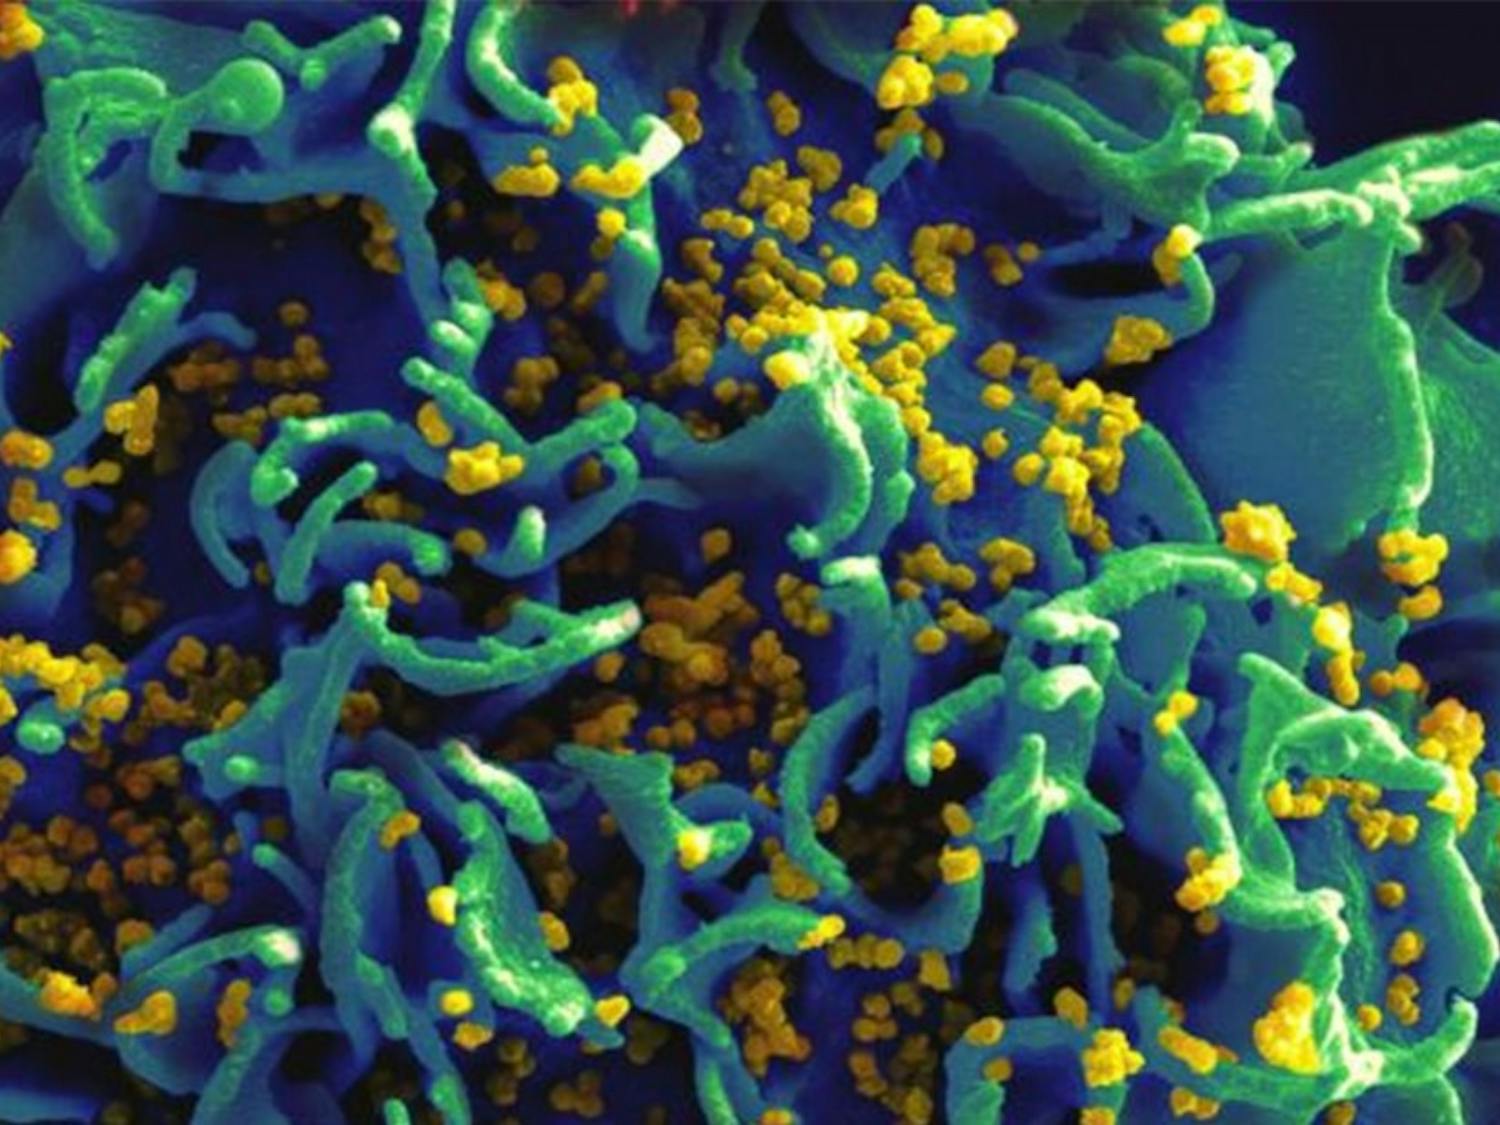 The antibody researchers found prevents  HIV from attaching to cells in the immune system.